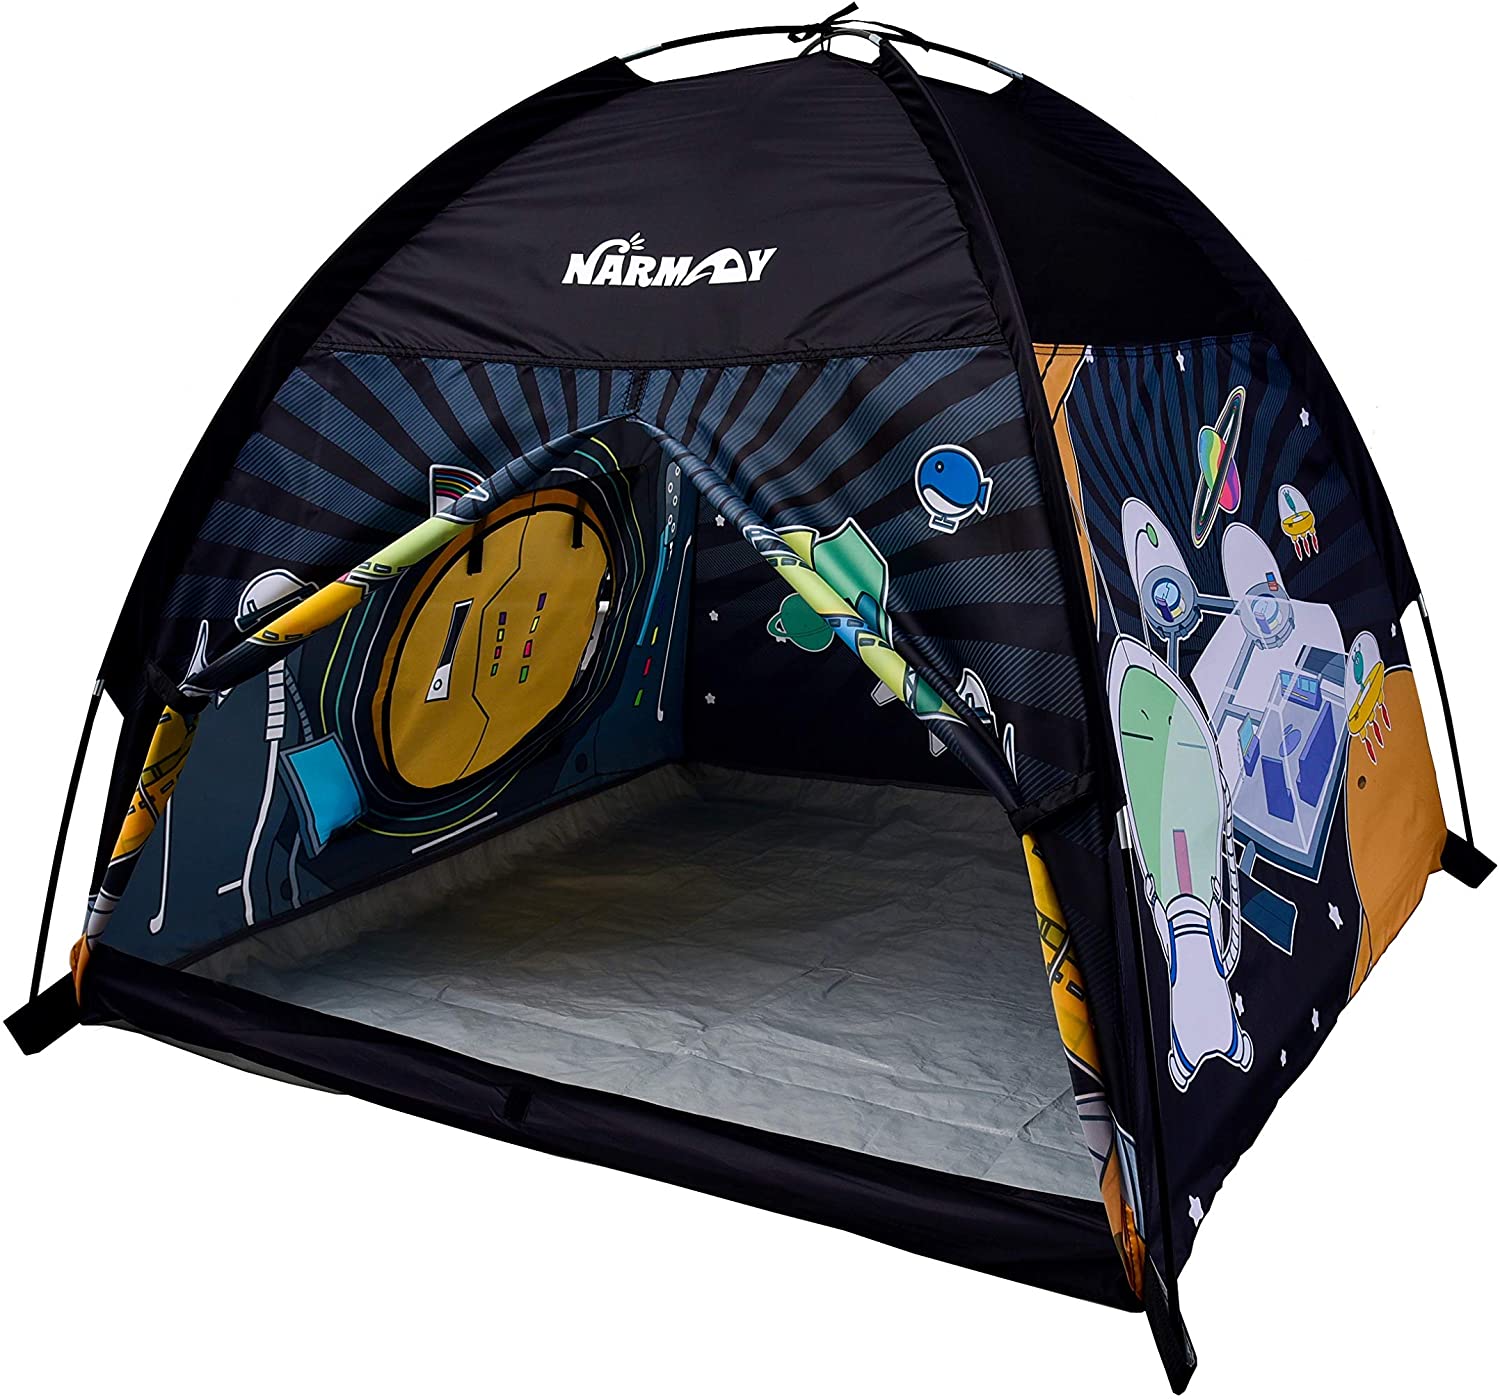 Play Tent Space World Dome Tent for Kids Indoor / Outdoor Fun - 48 x 48 x 40 inch